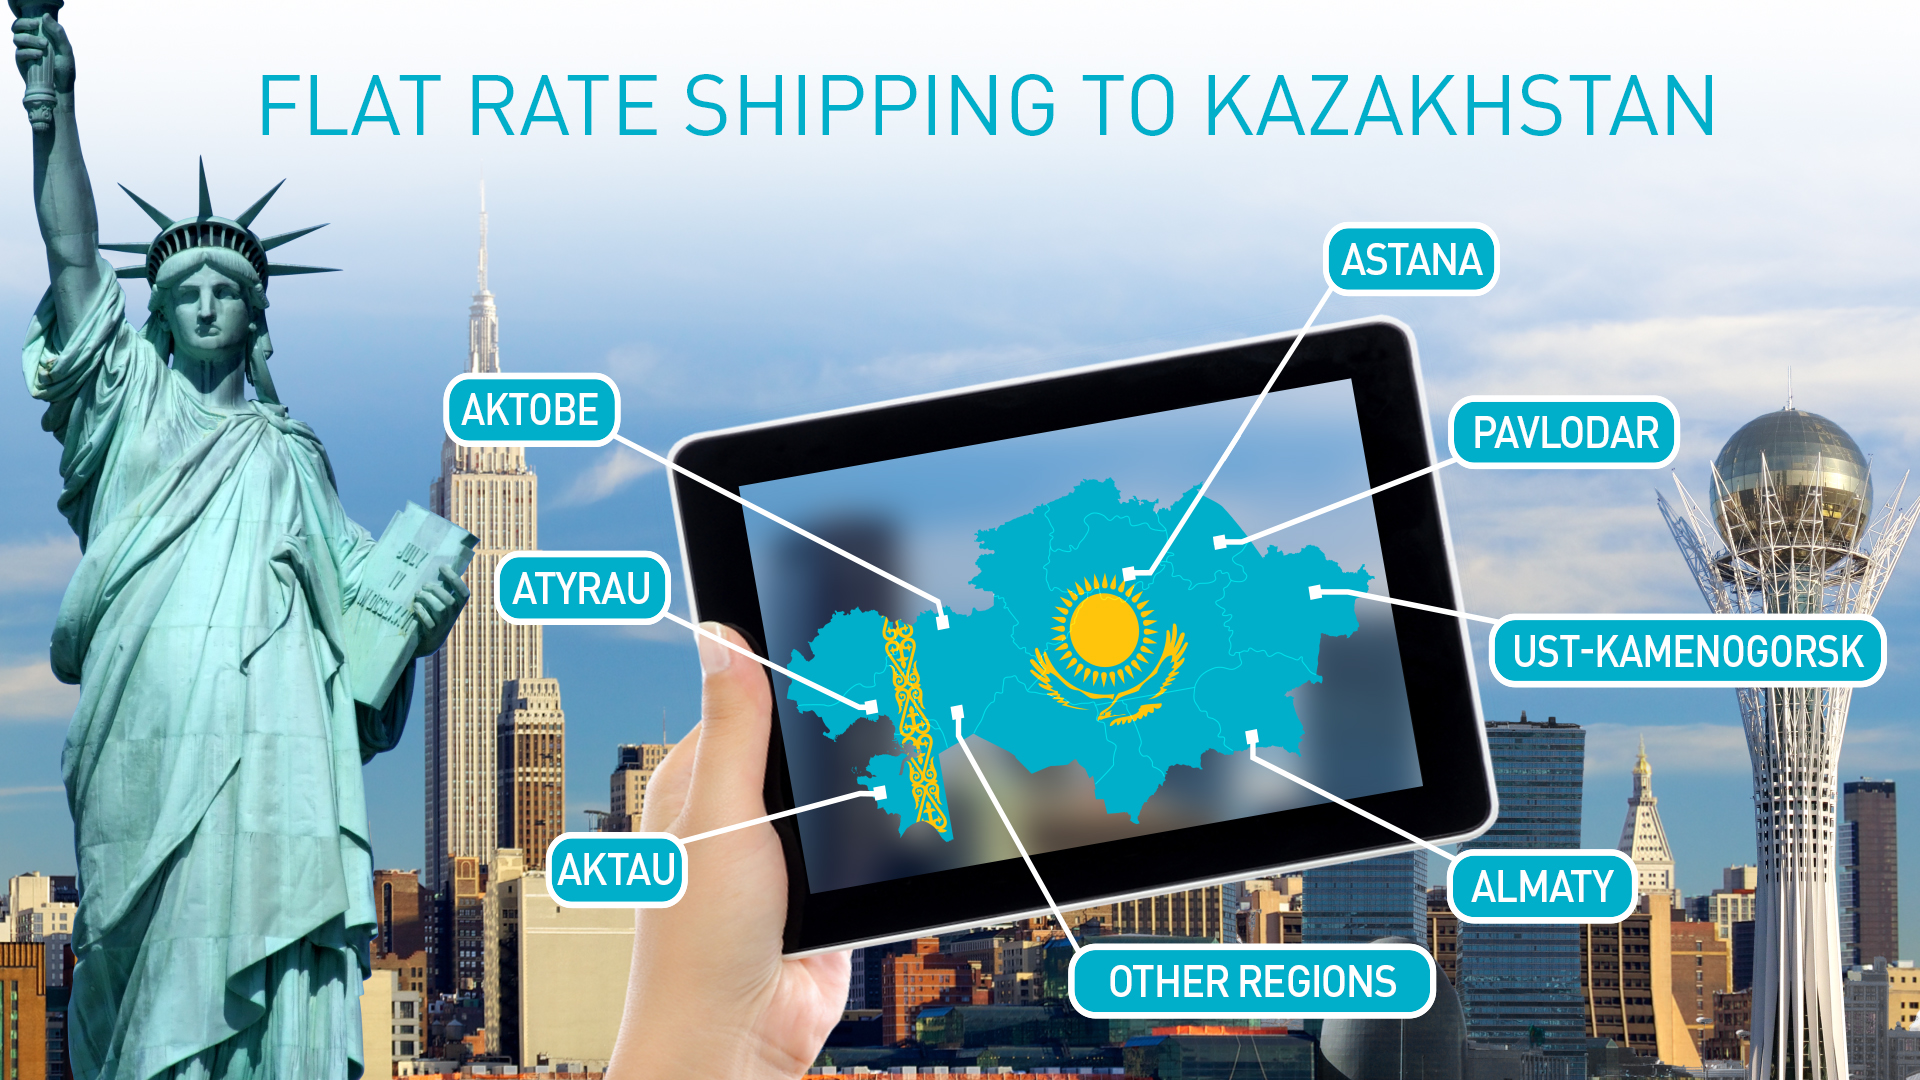 Flat Rate Shipping Now Available for Amazon Prime Products to Kazakhstan